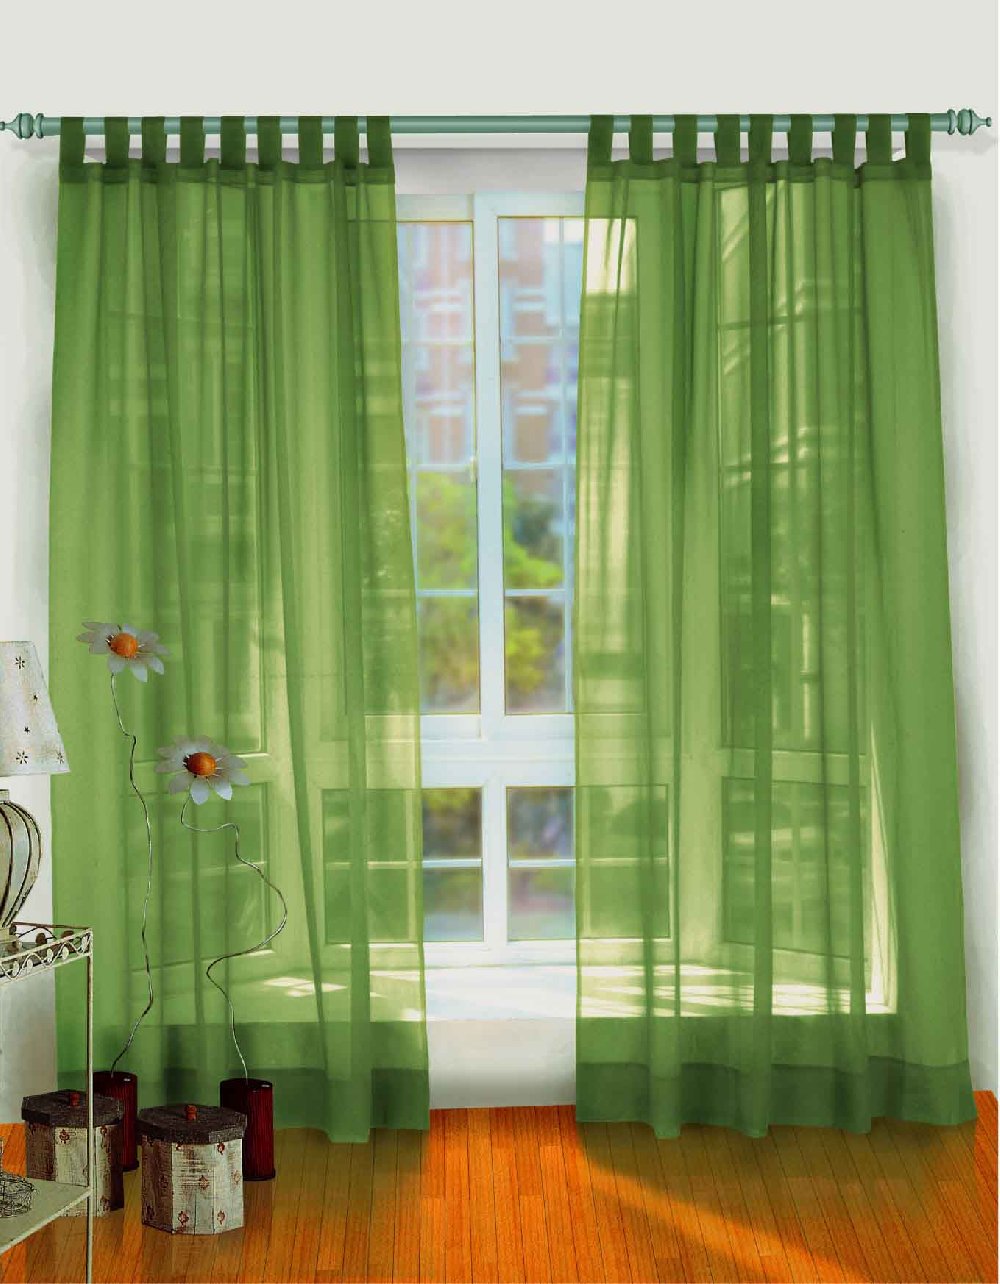 Cafe Style Curtains in Curtain